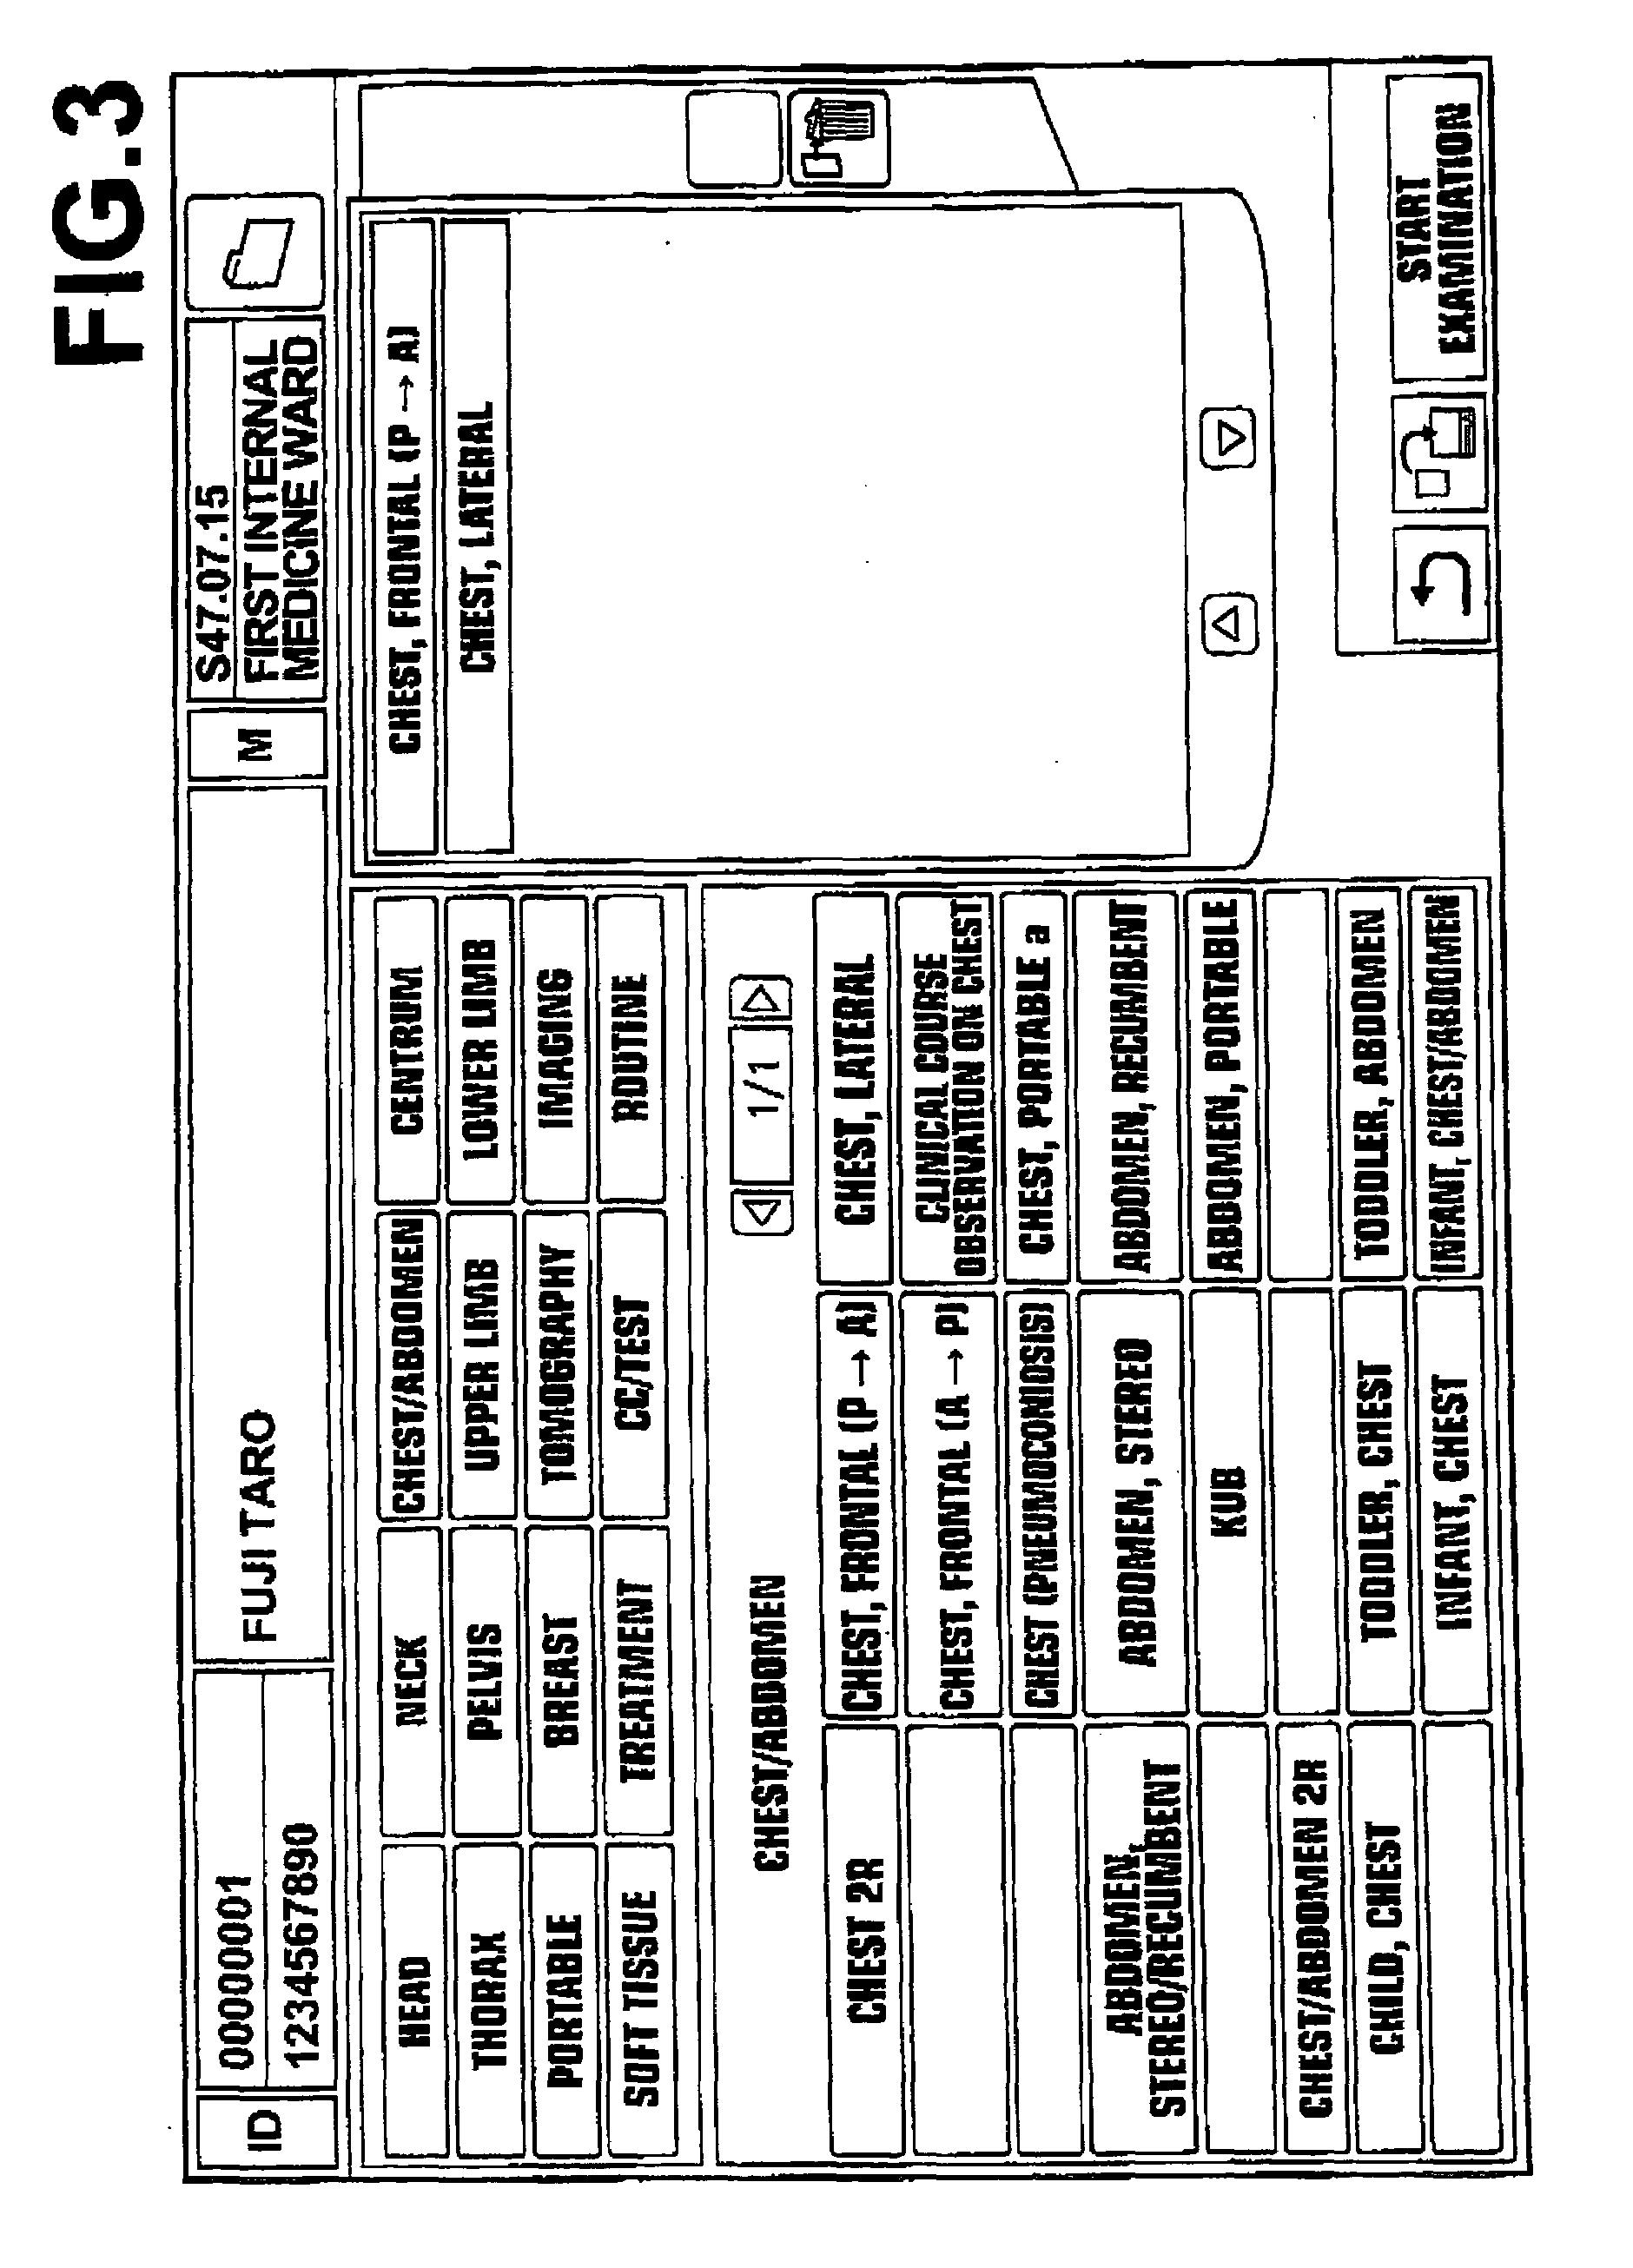 Image reproduction apparatus and program therefor